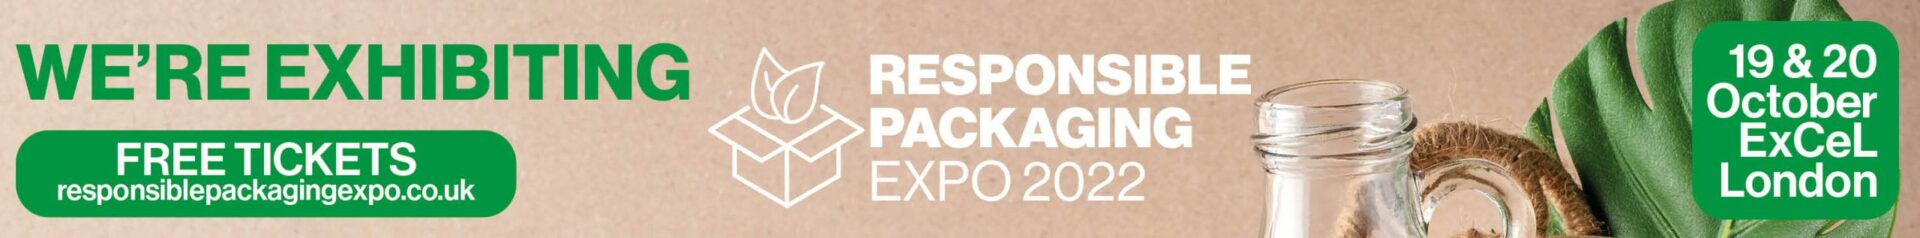 Responsible Packaging Show Banner